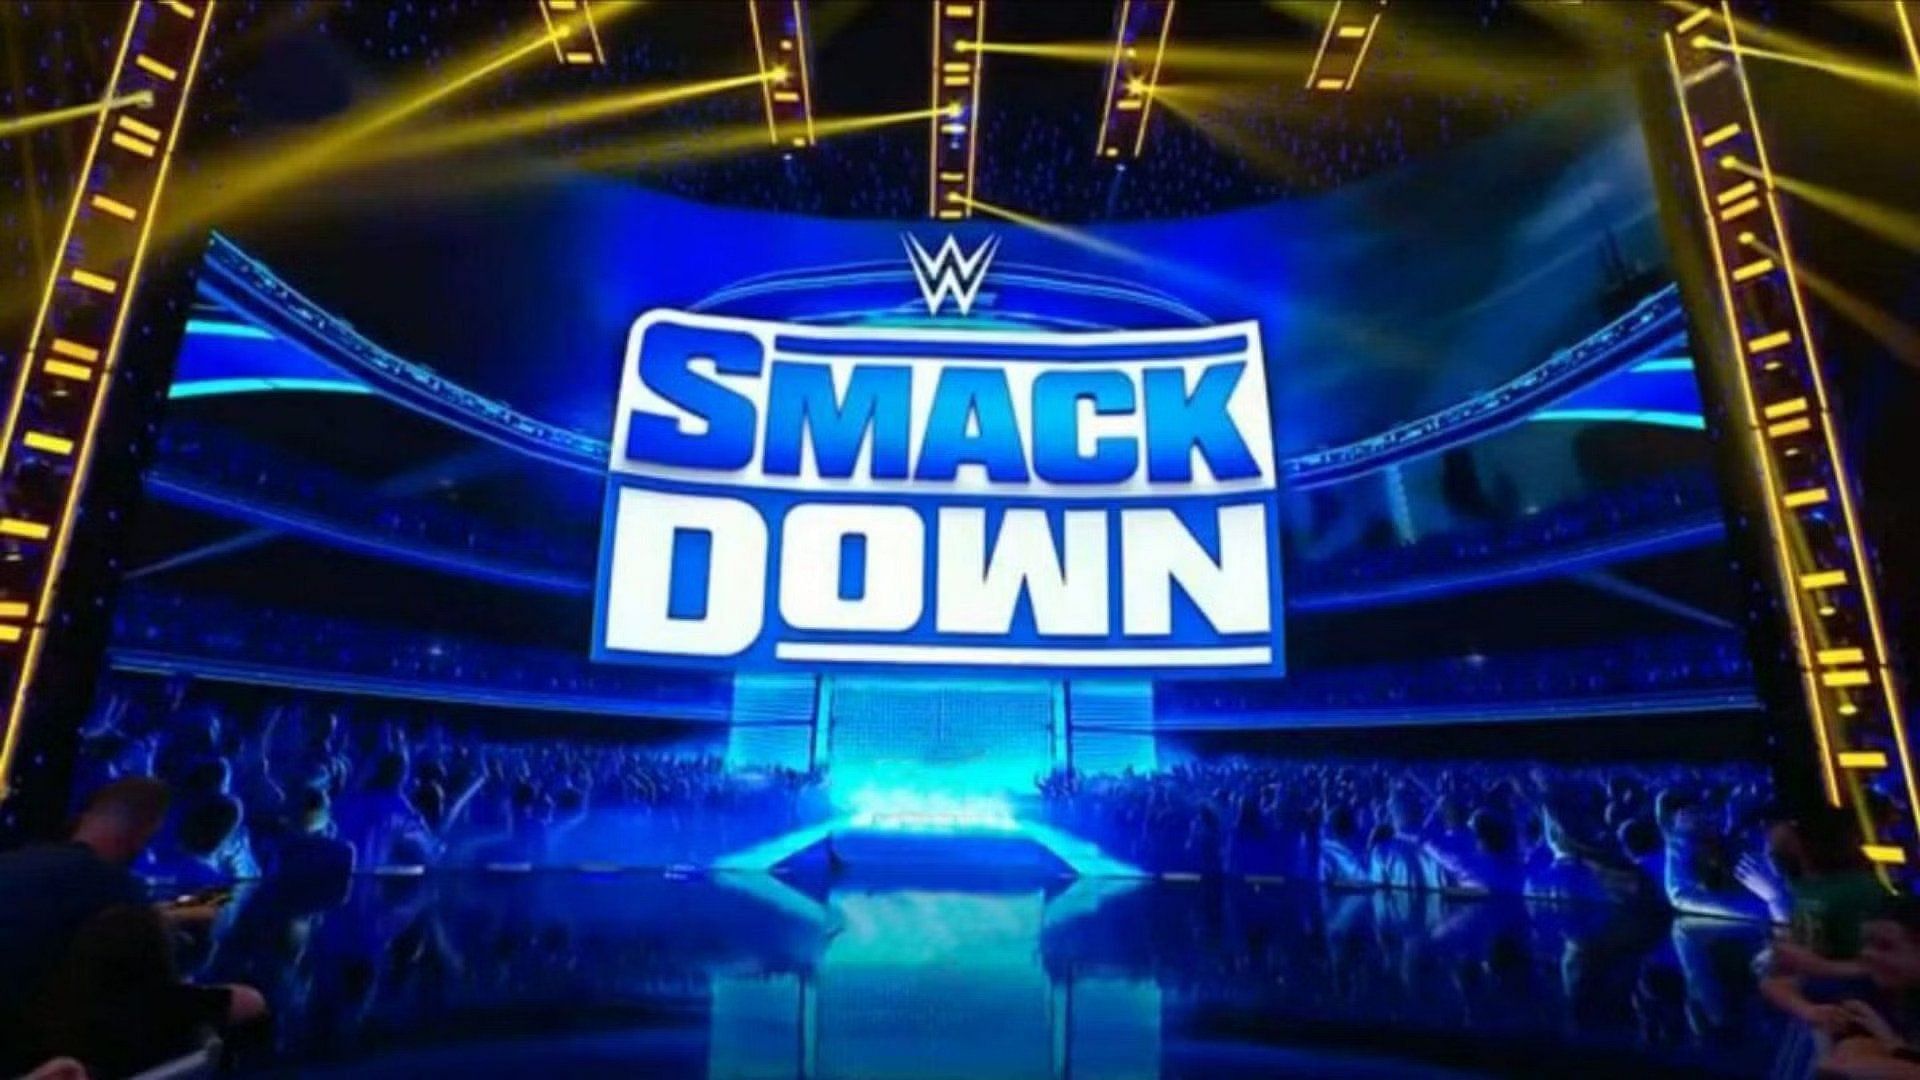 WWE SmackDown roster is full of talented stars!